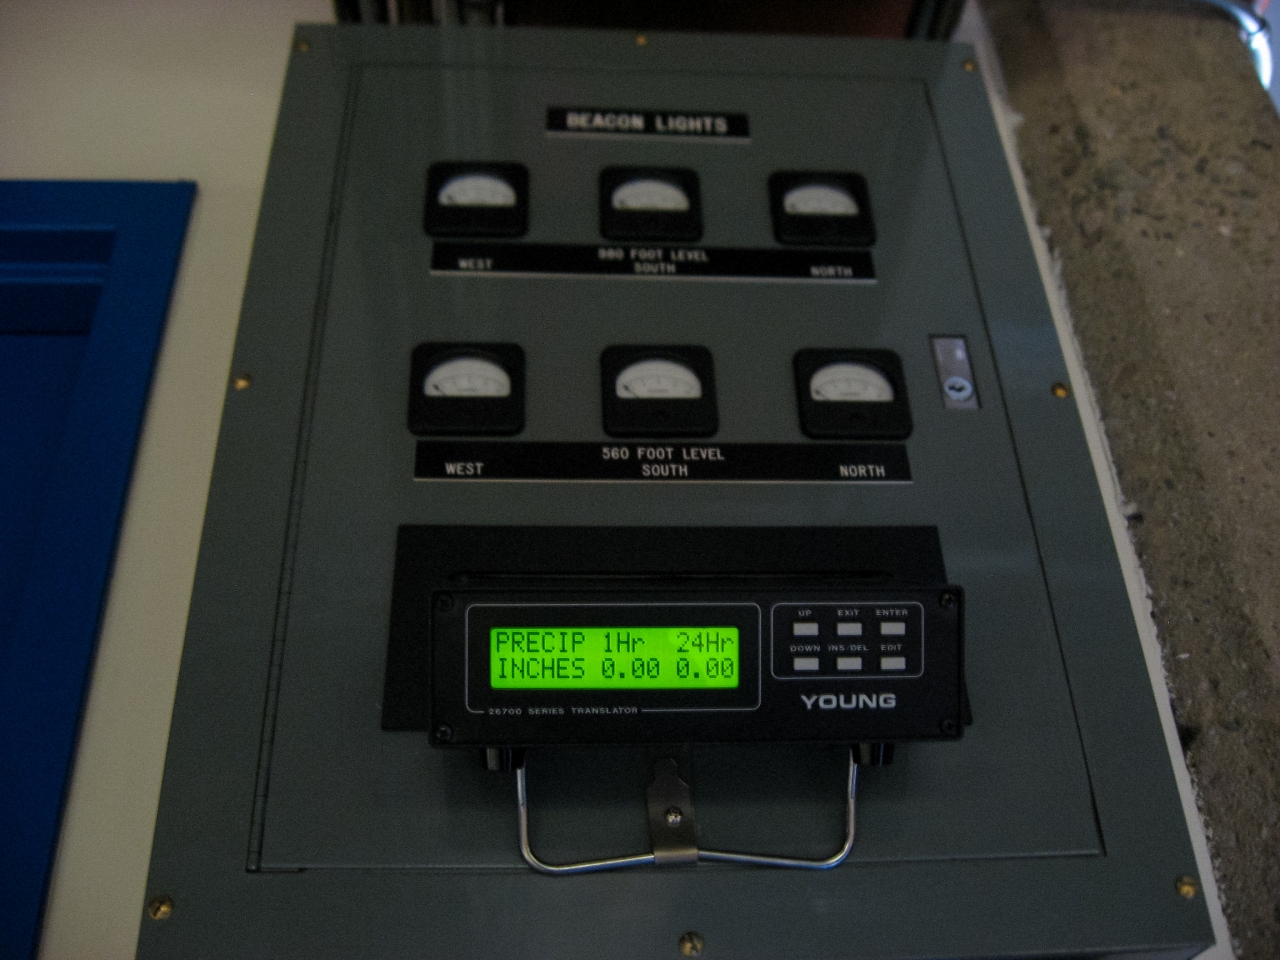 This control panel displays the weather conditions at each level of Sutro Tower.